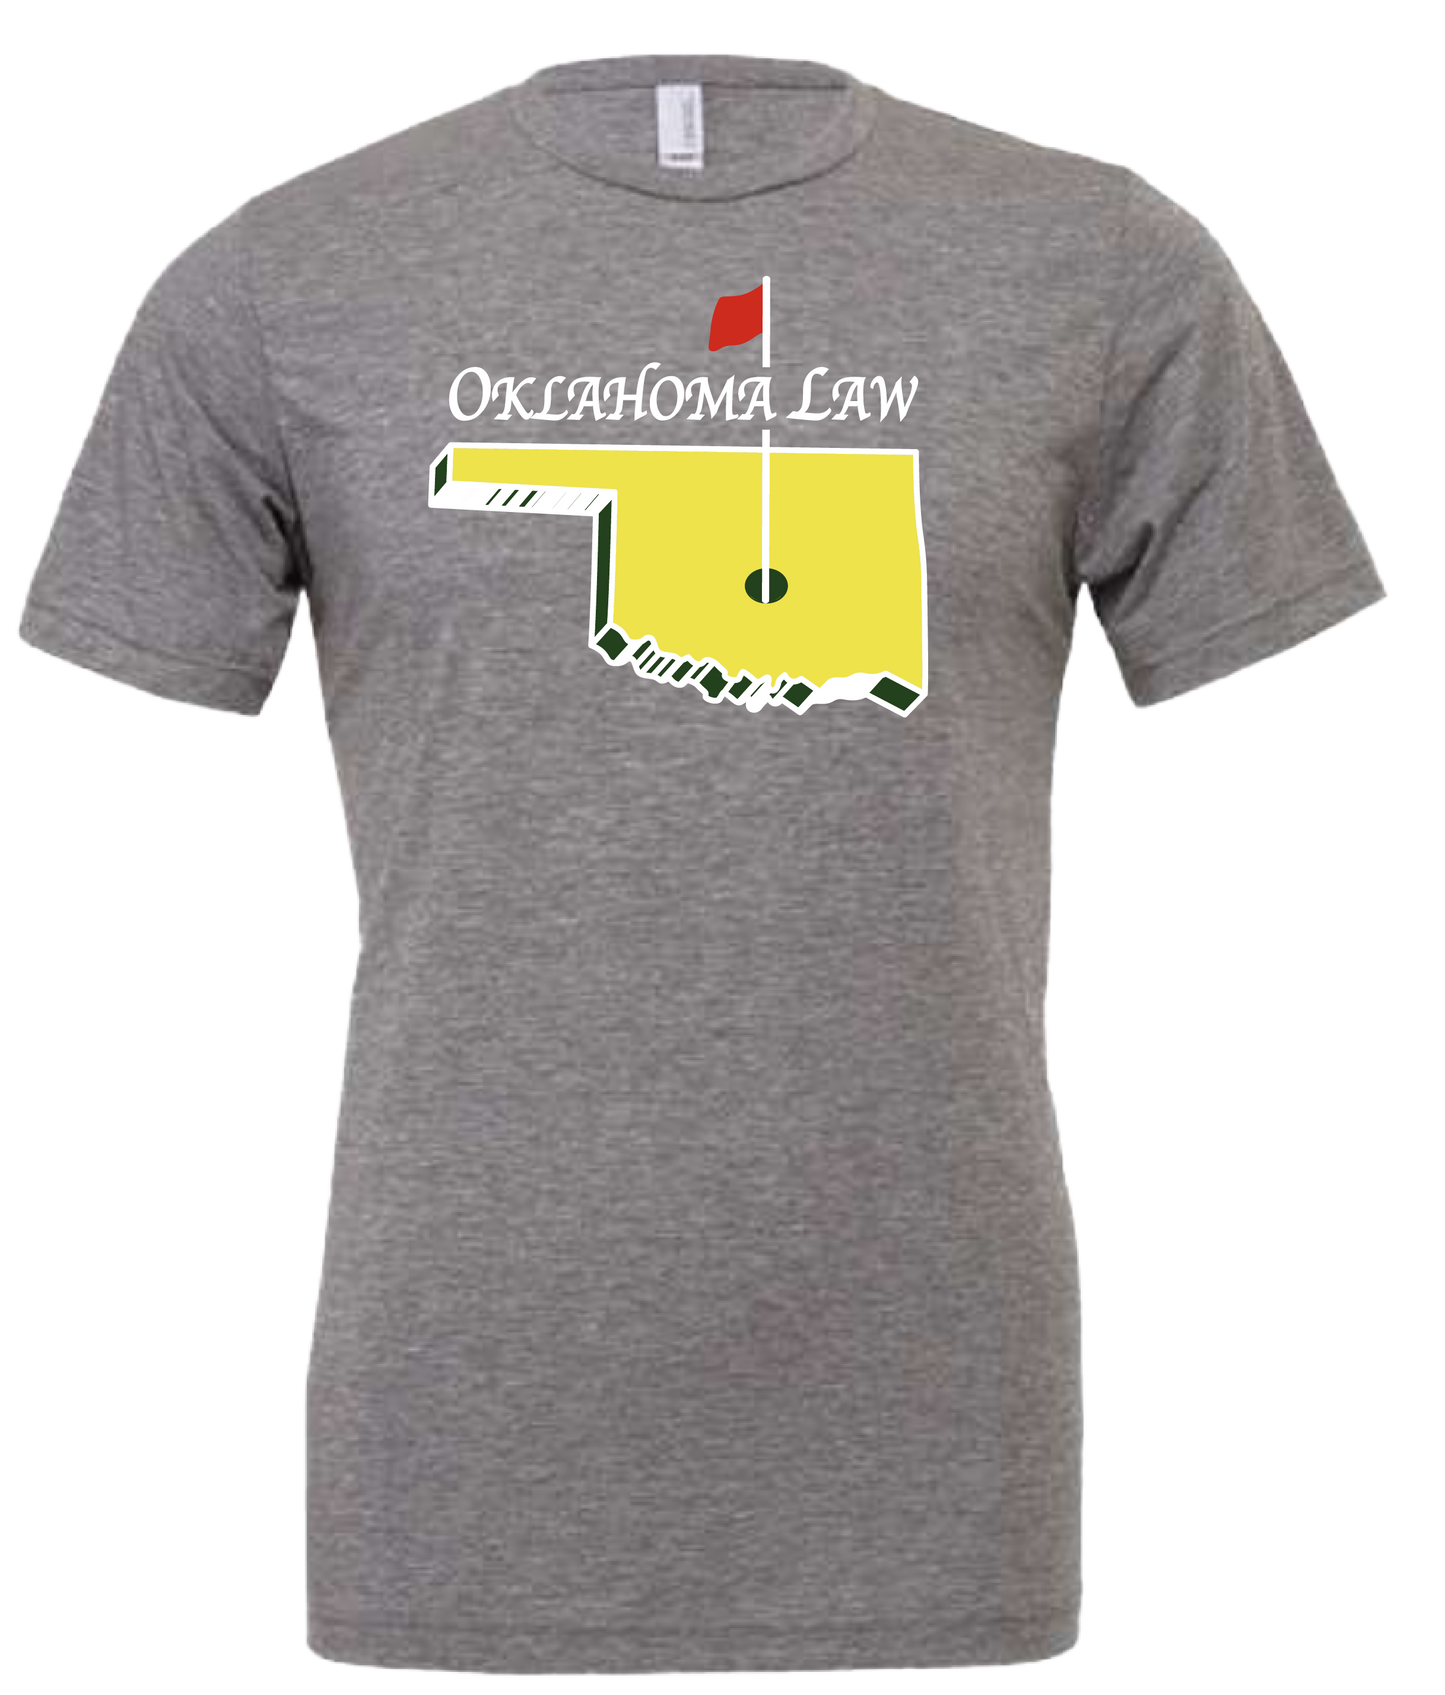 front: Oklahoma Law OK Golf/ back: OU FedSoc An Organization Unlike Any Other t-shirt